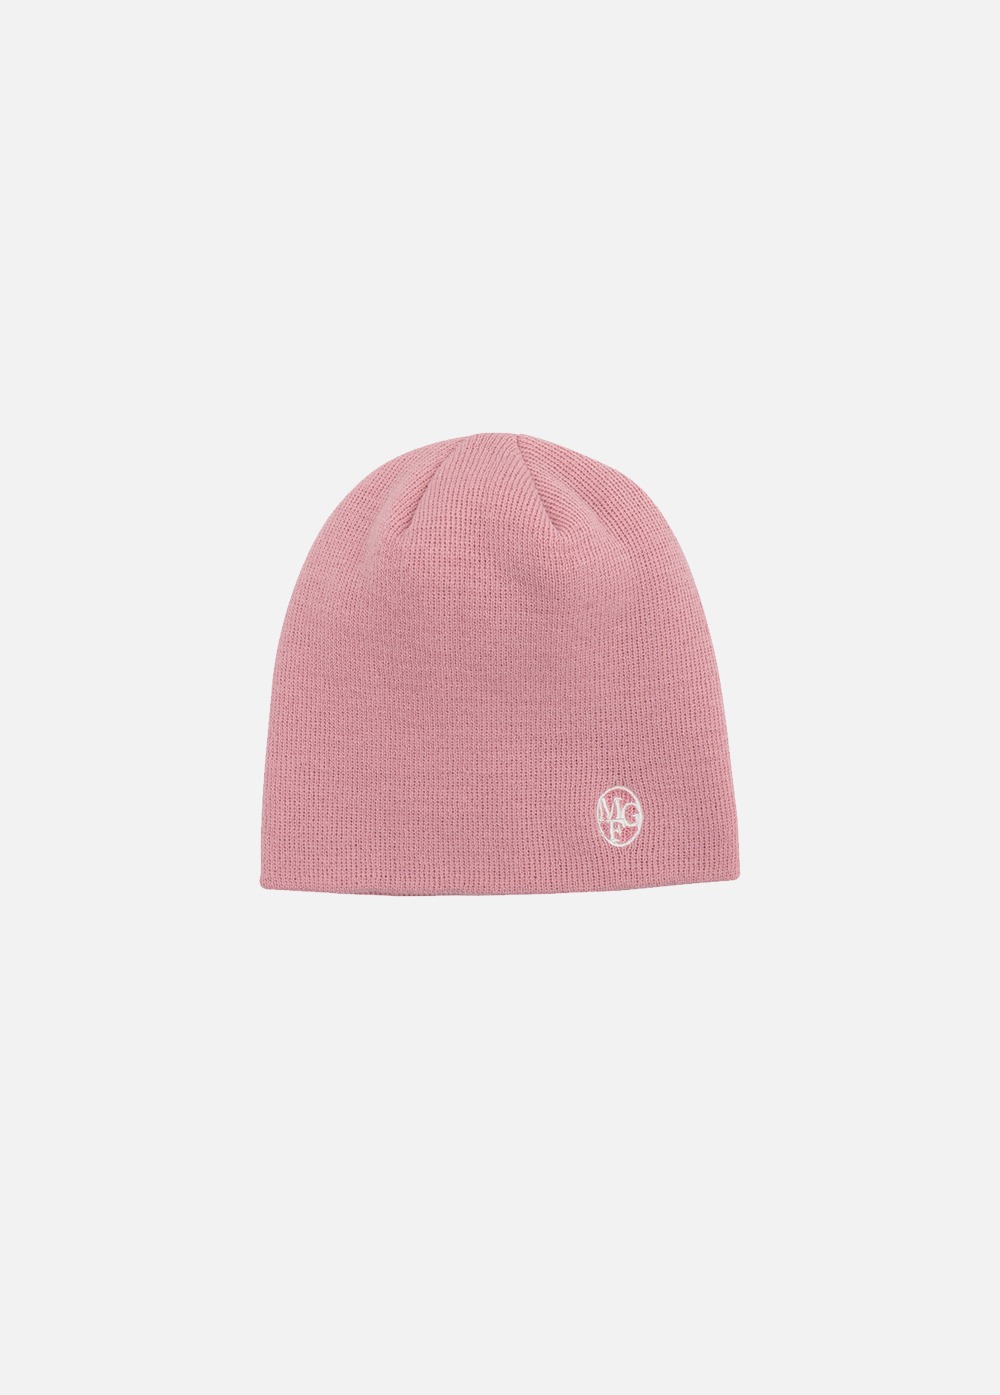 EMBROIDERY LOGO BEANIE pink